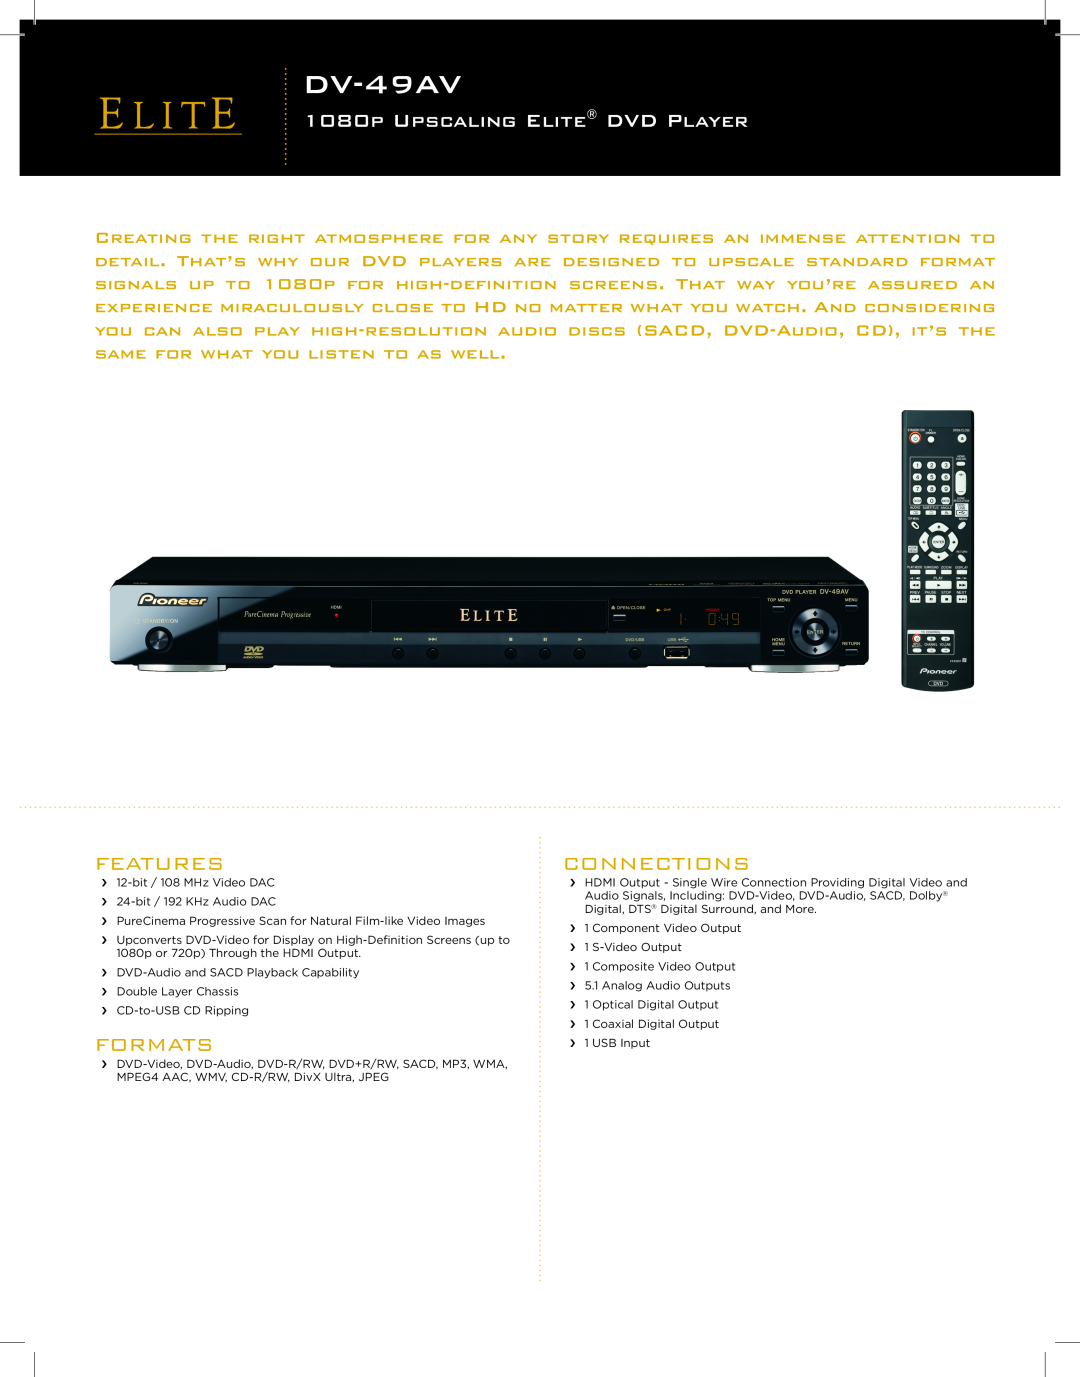 Pioneer DV-49AV manual 1080p Upscaling Elite DVD Player, Features, Formats, Connections 